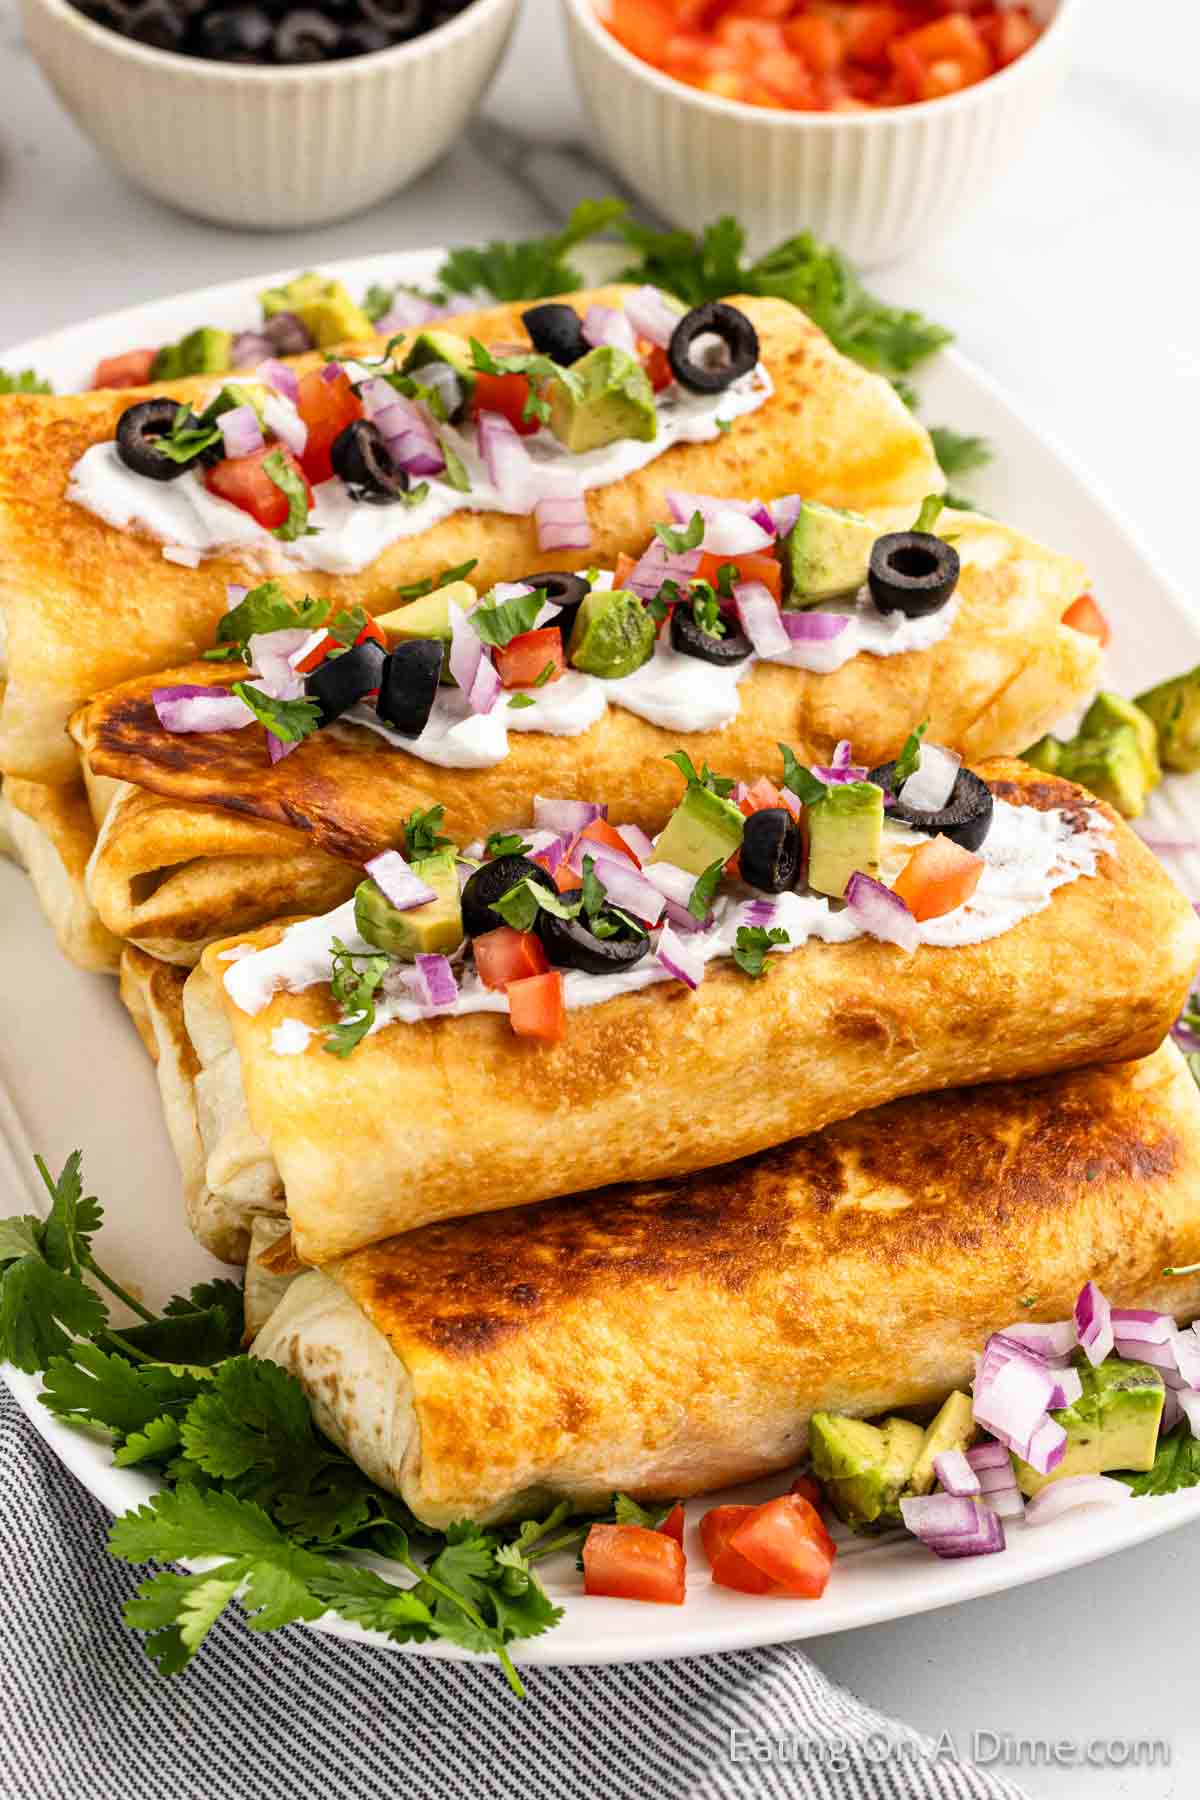 A plate of golden-brown beef chimichangas topped with sour cream, chopped tomatoes, red onions, black olives, and cilantro. Surrounding the plate are small bowls containing black olives and diced tomatoes. The vibrant ingredients add a splash of color to the dish.